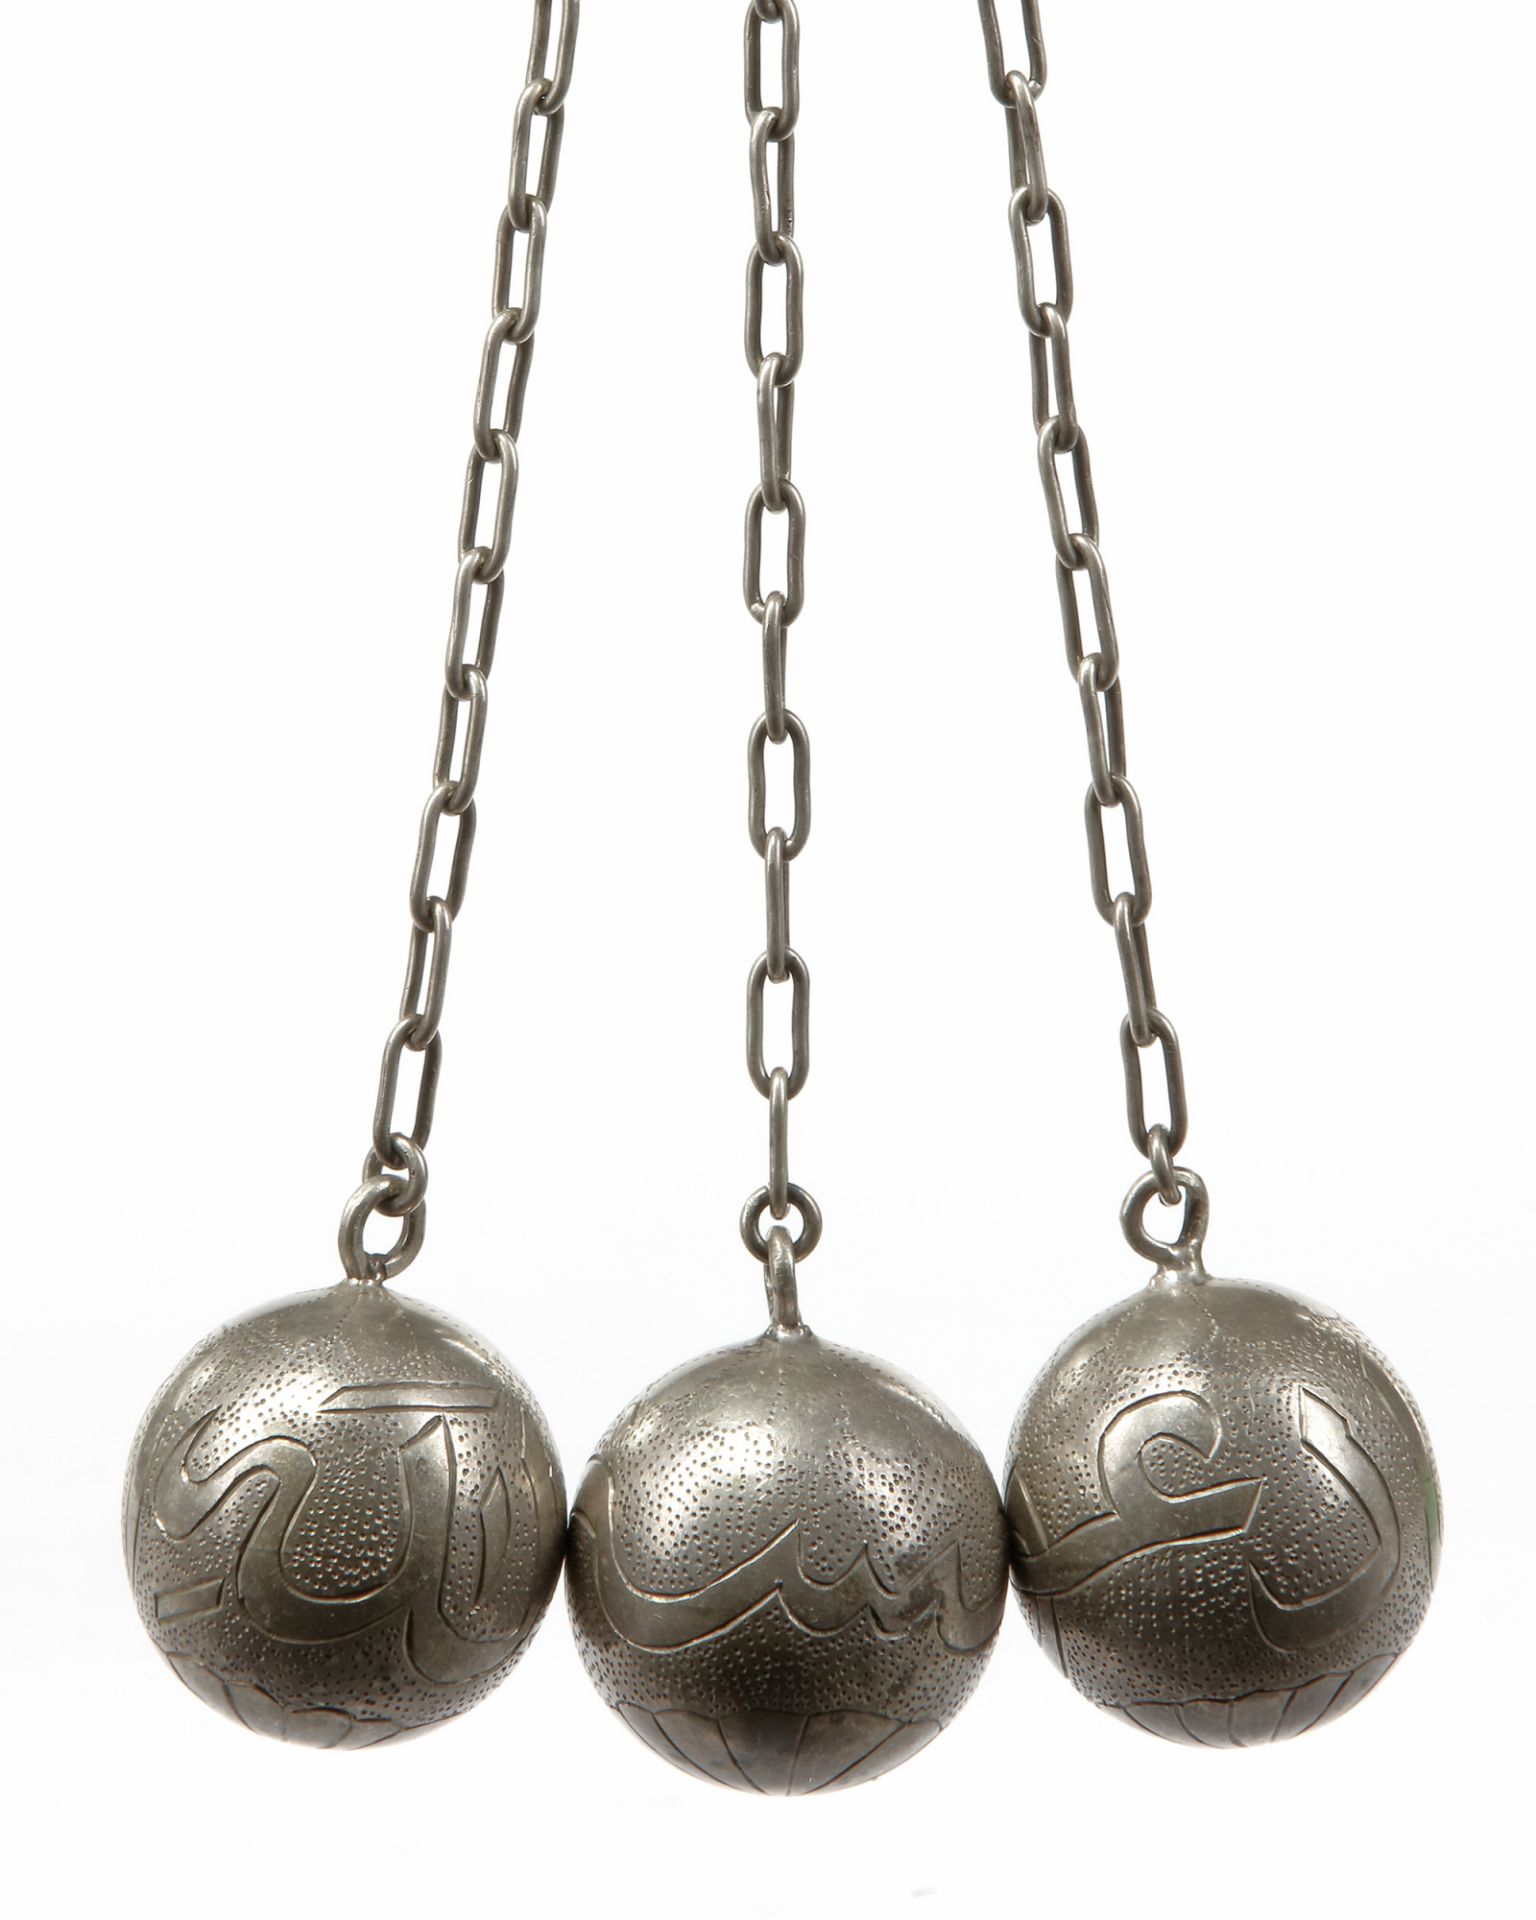 LARGE OTTOMAN SILVER PRAYER BEADS, LATE 19TH CENTURY - Image 12 of 12